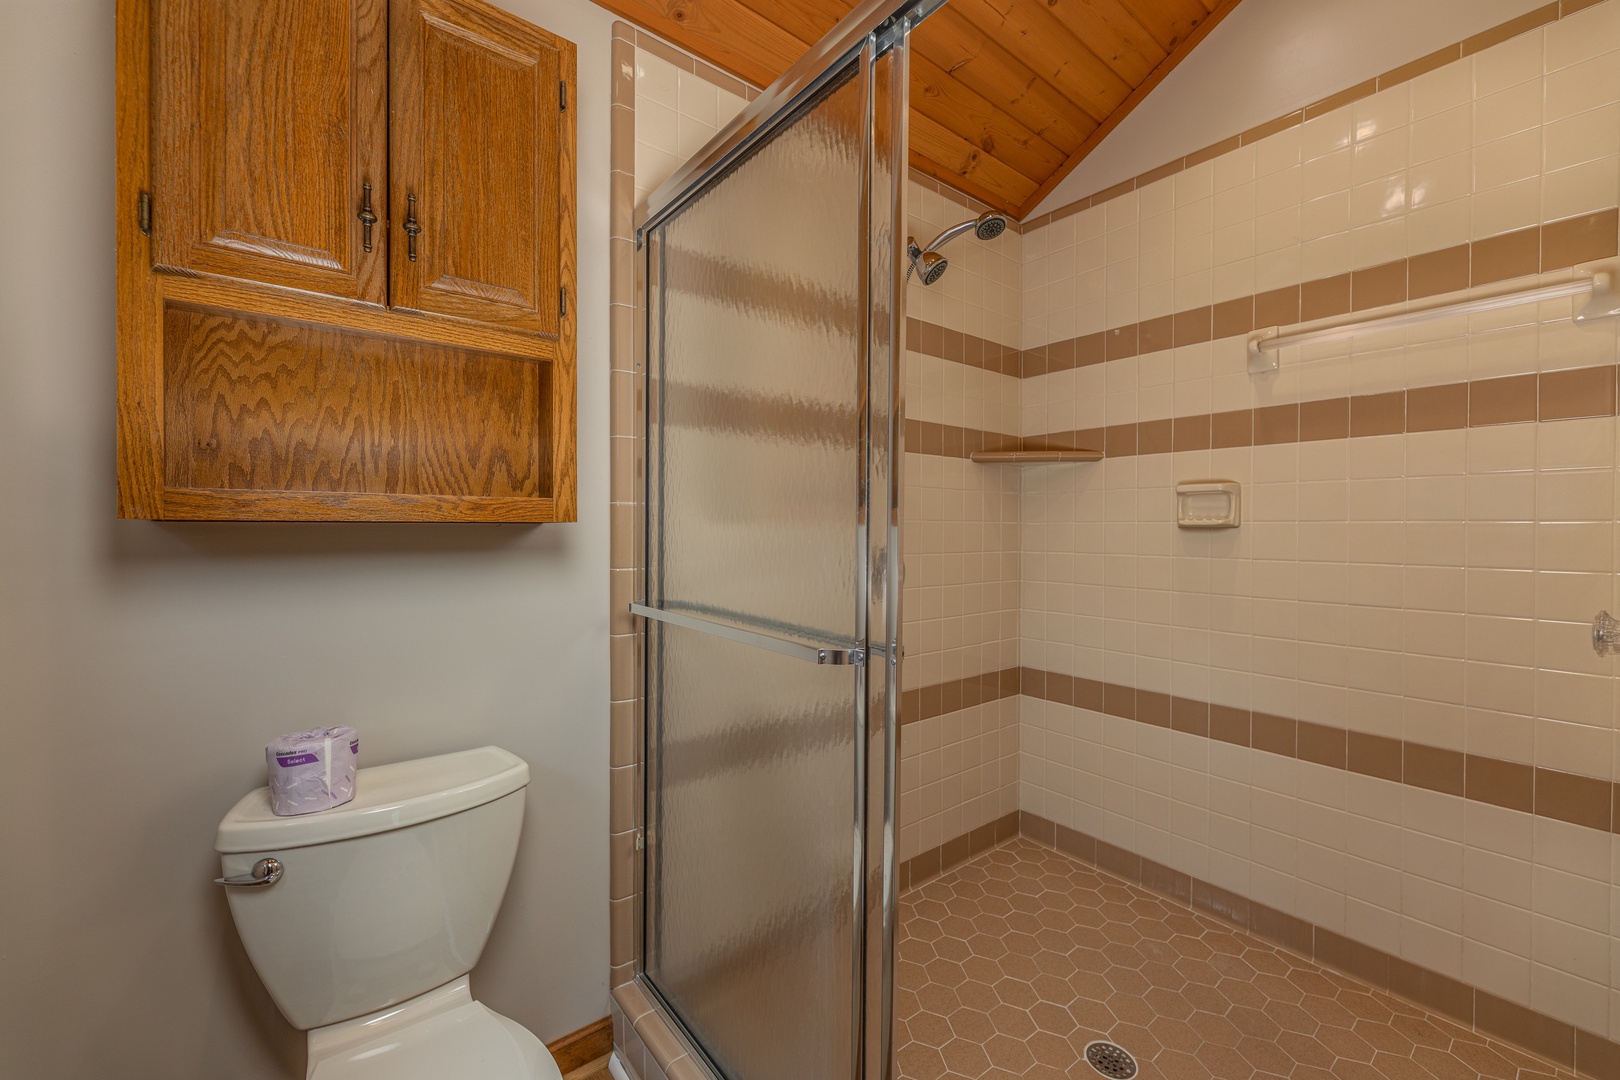 Shower in a bathroom at Cubs' Crib, a 3 bedroom cabin rental located in Gatlinburg